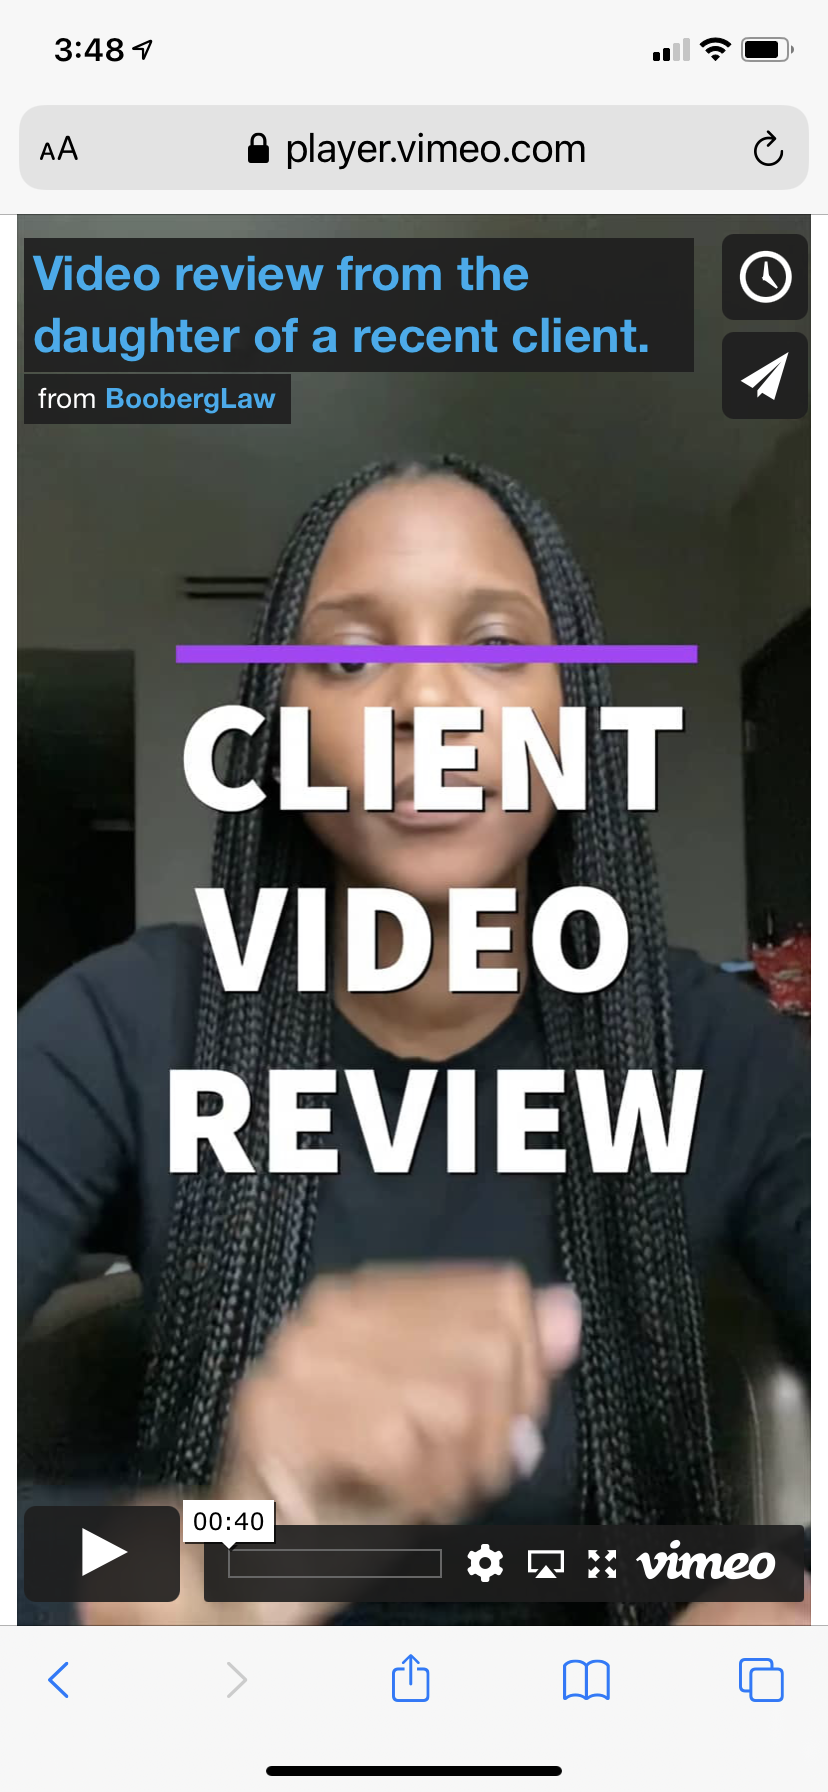 A video review from a recent client’s daughter